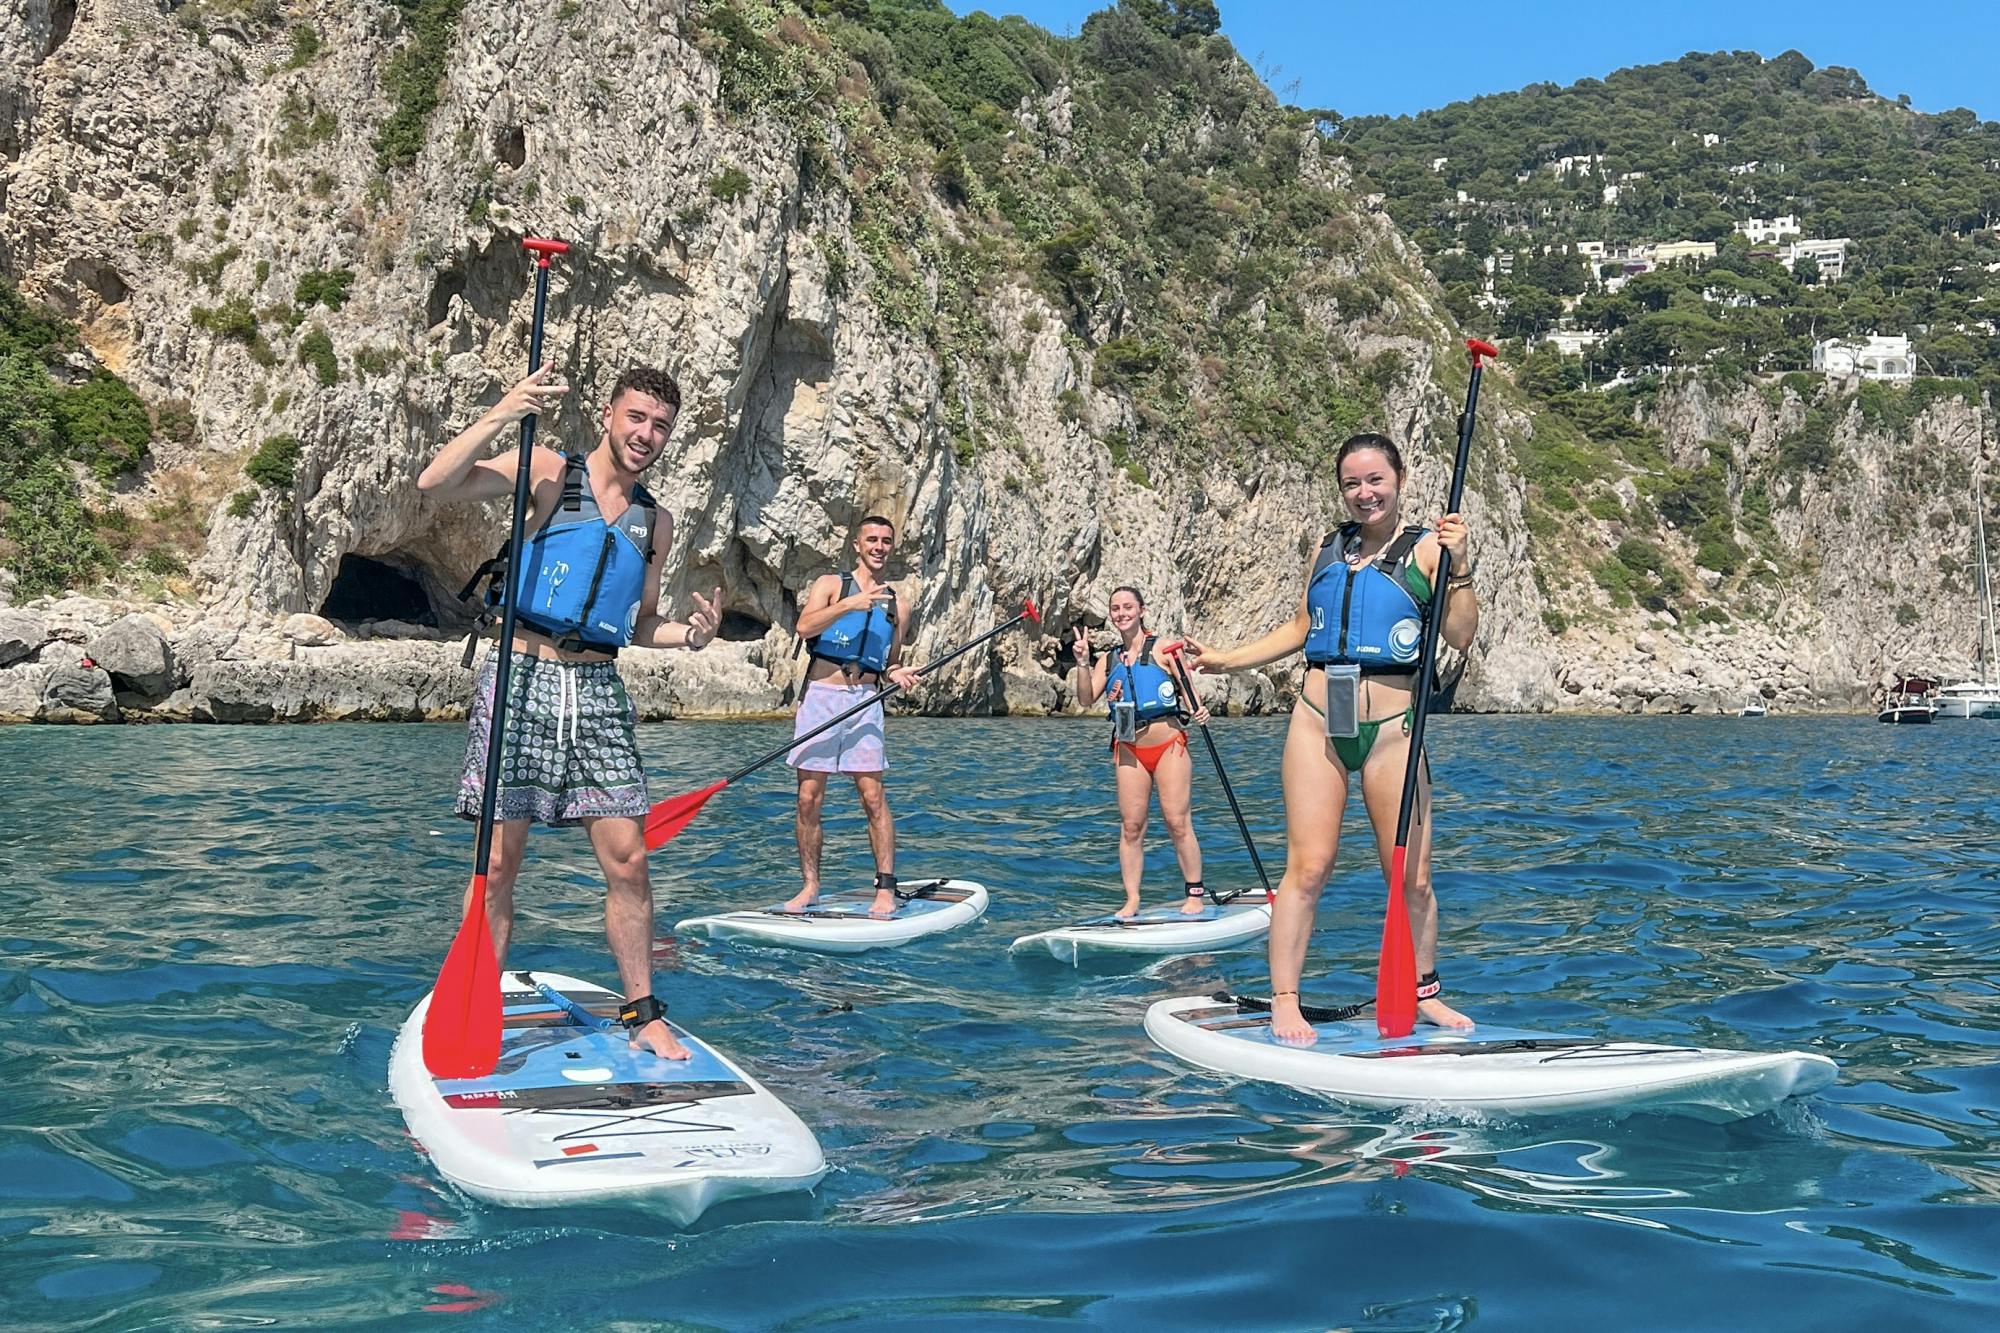 Capri caves and beaches tour on paddleboard